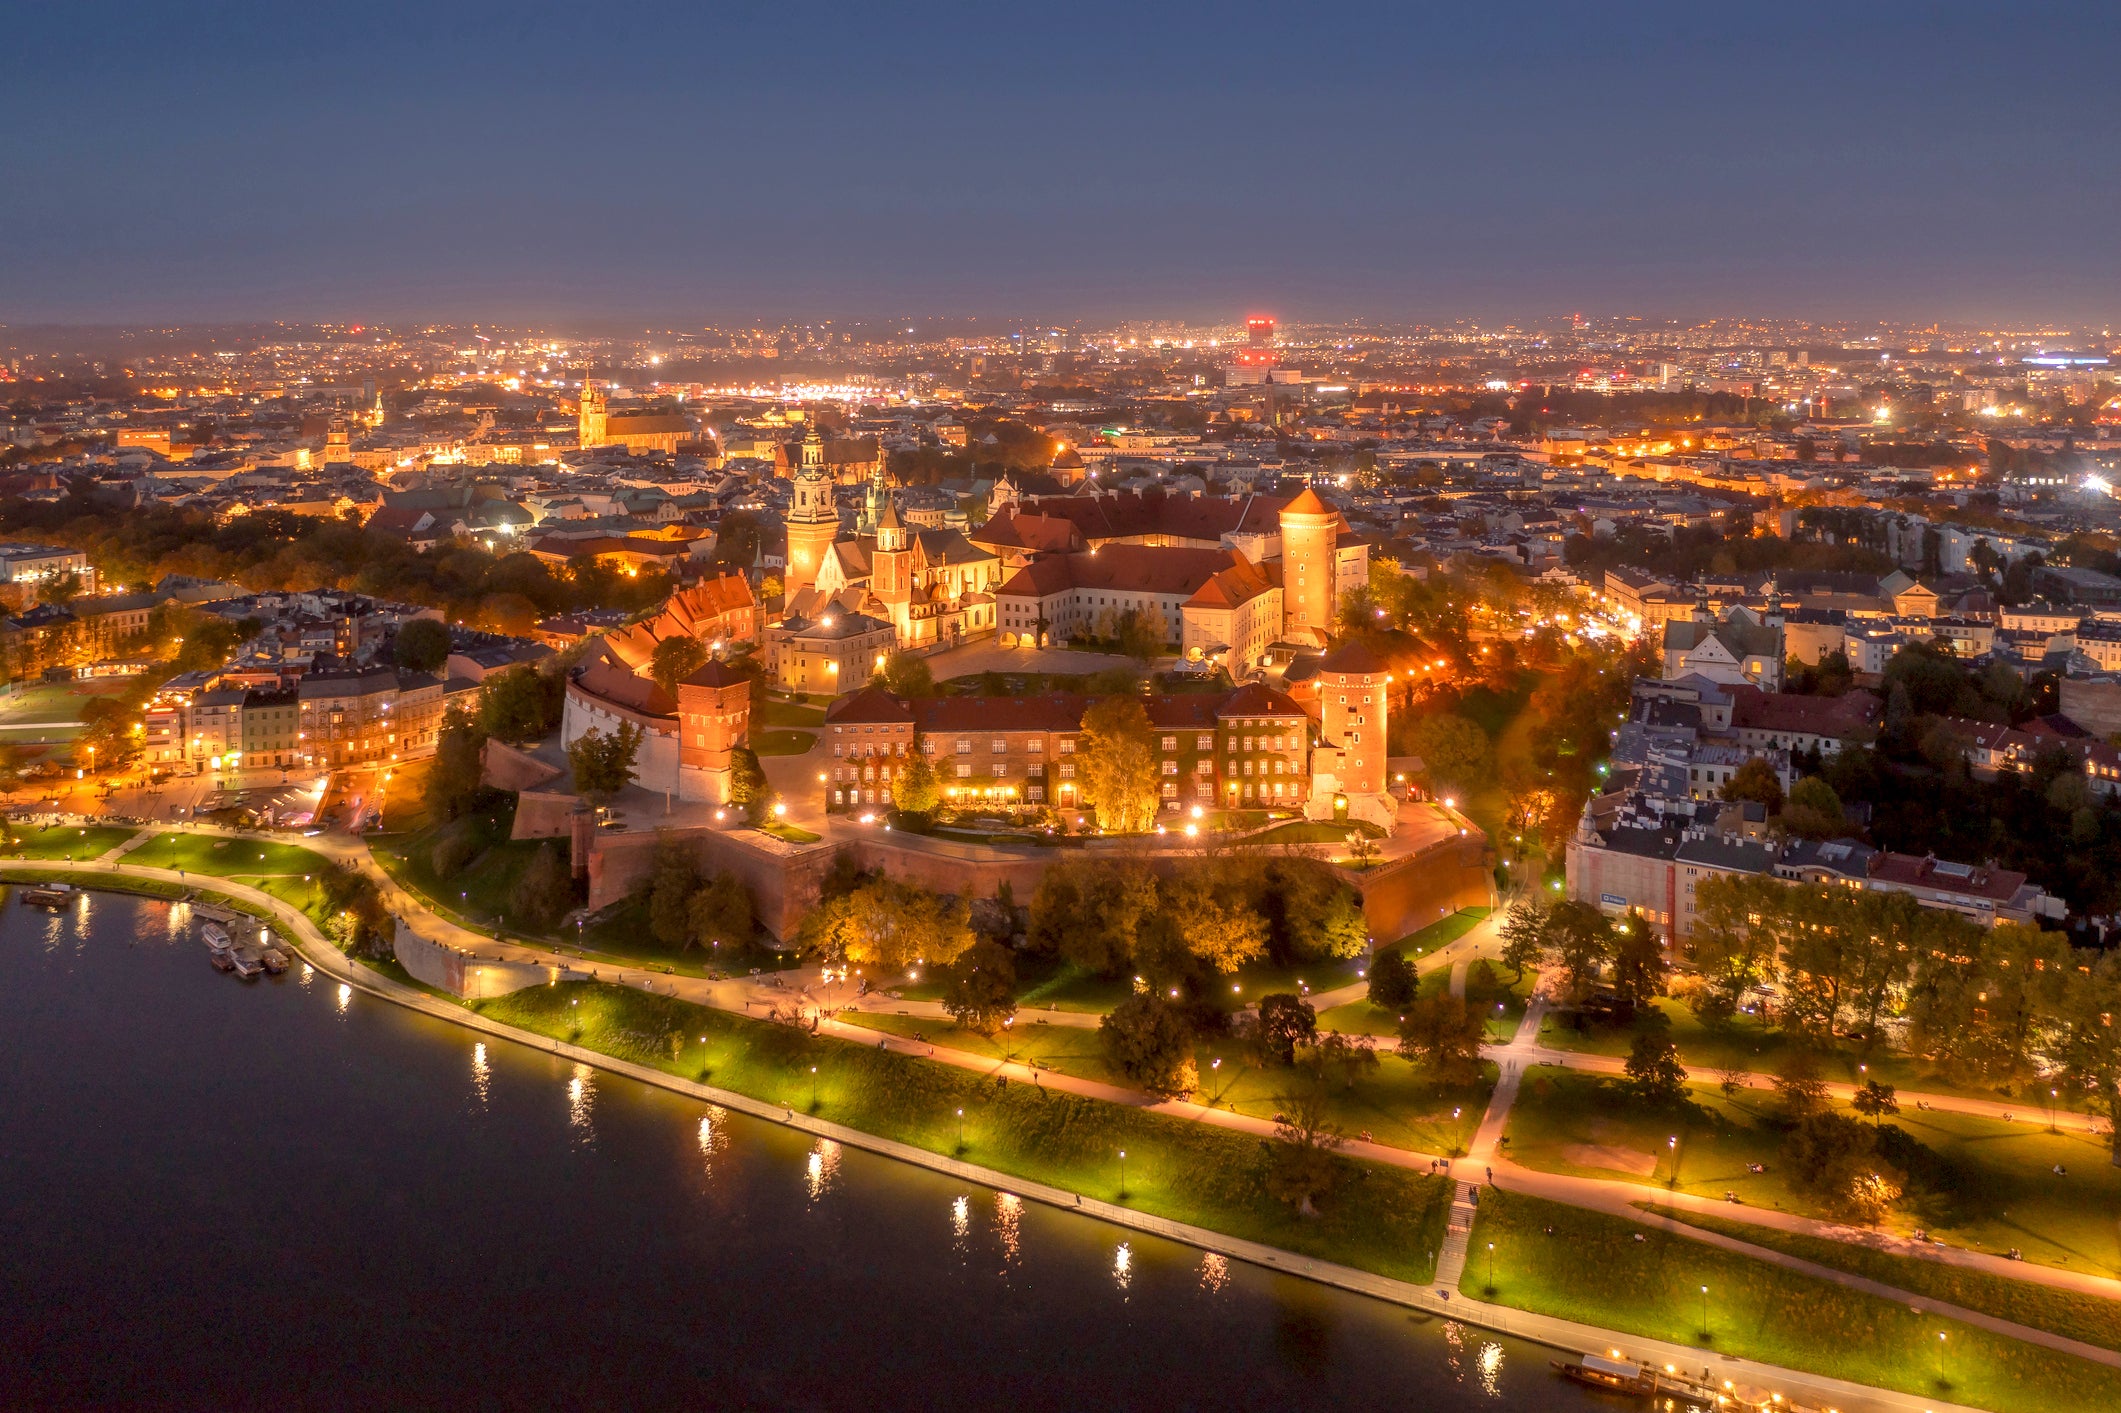 Visitor numbers in Krakow are likely down so you may find good hotel deals